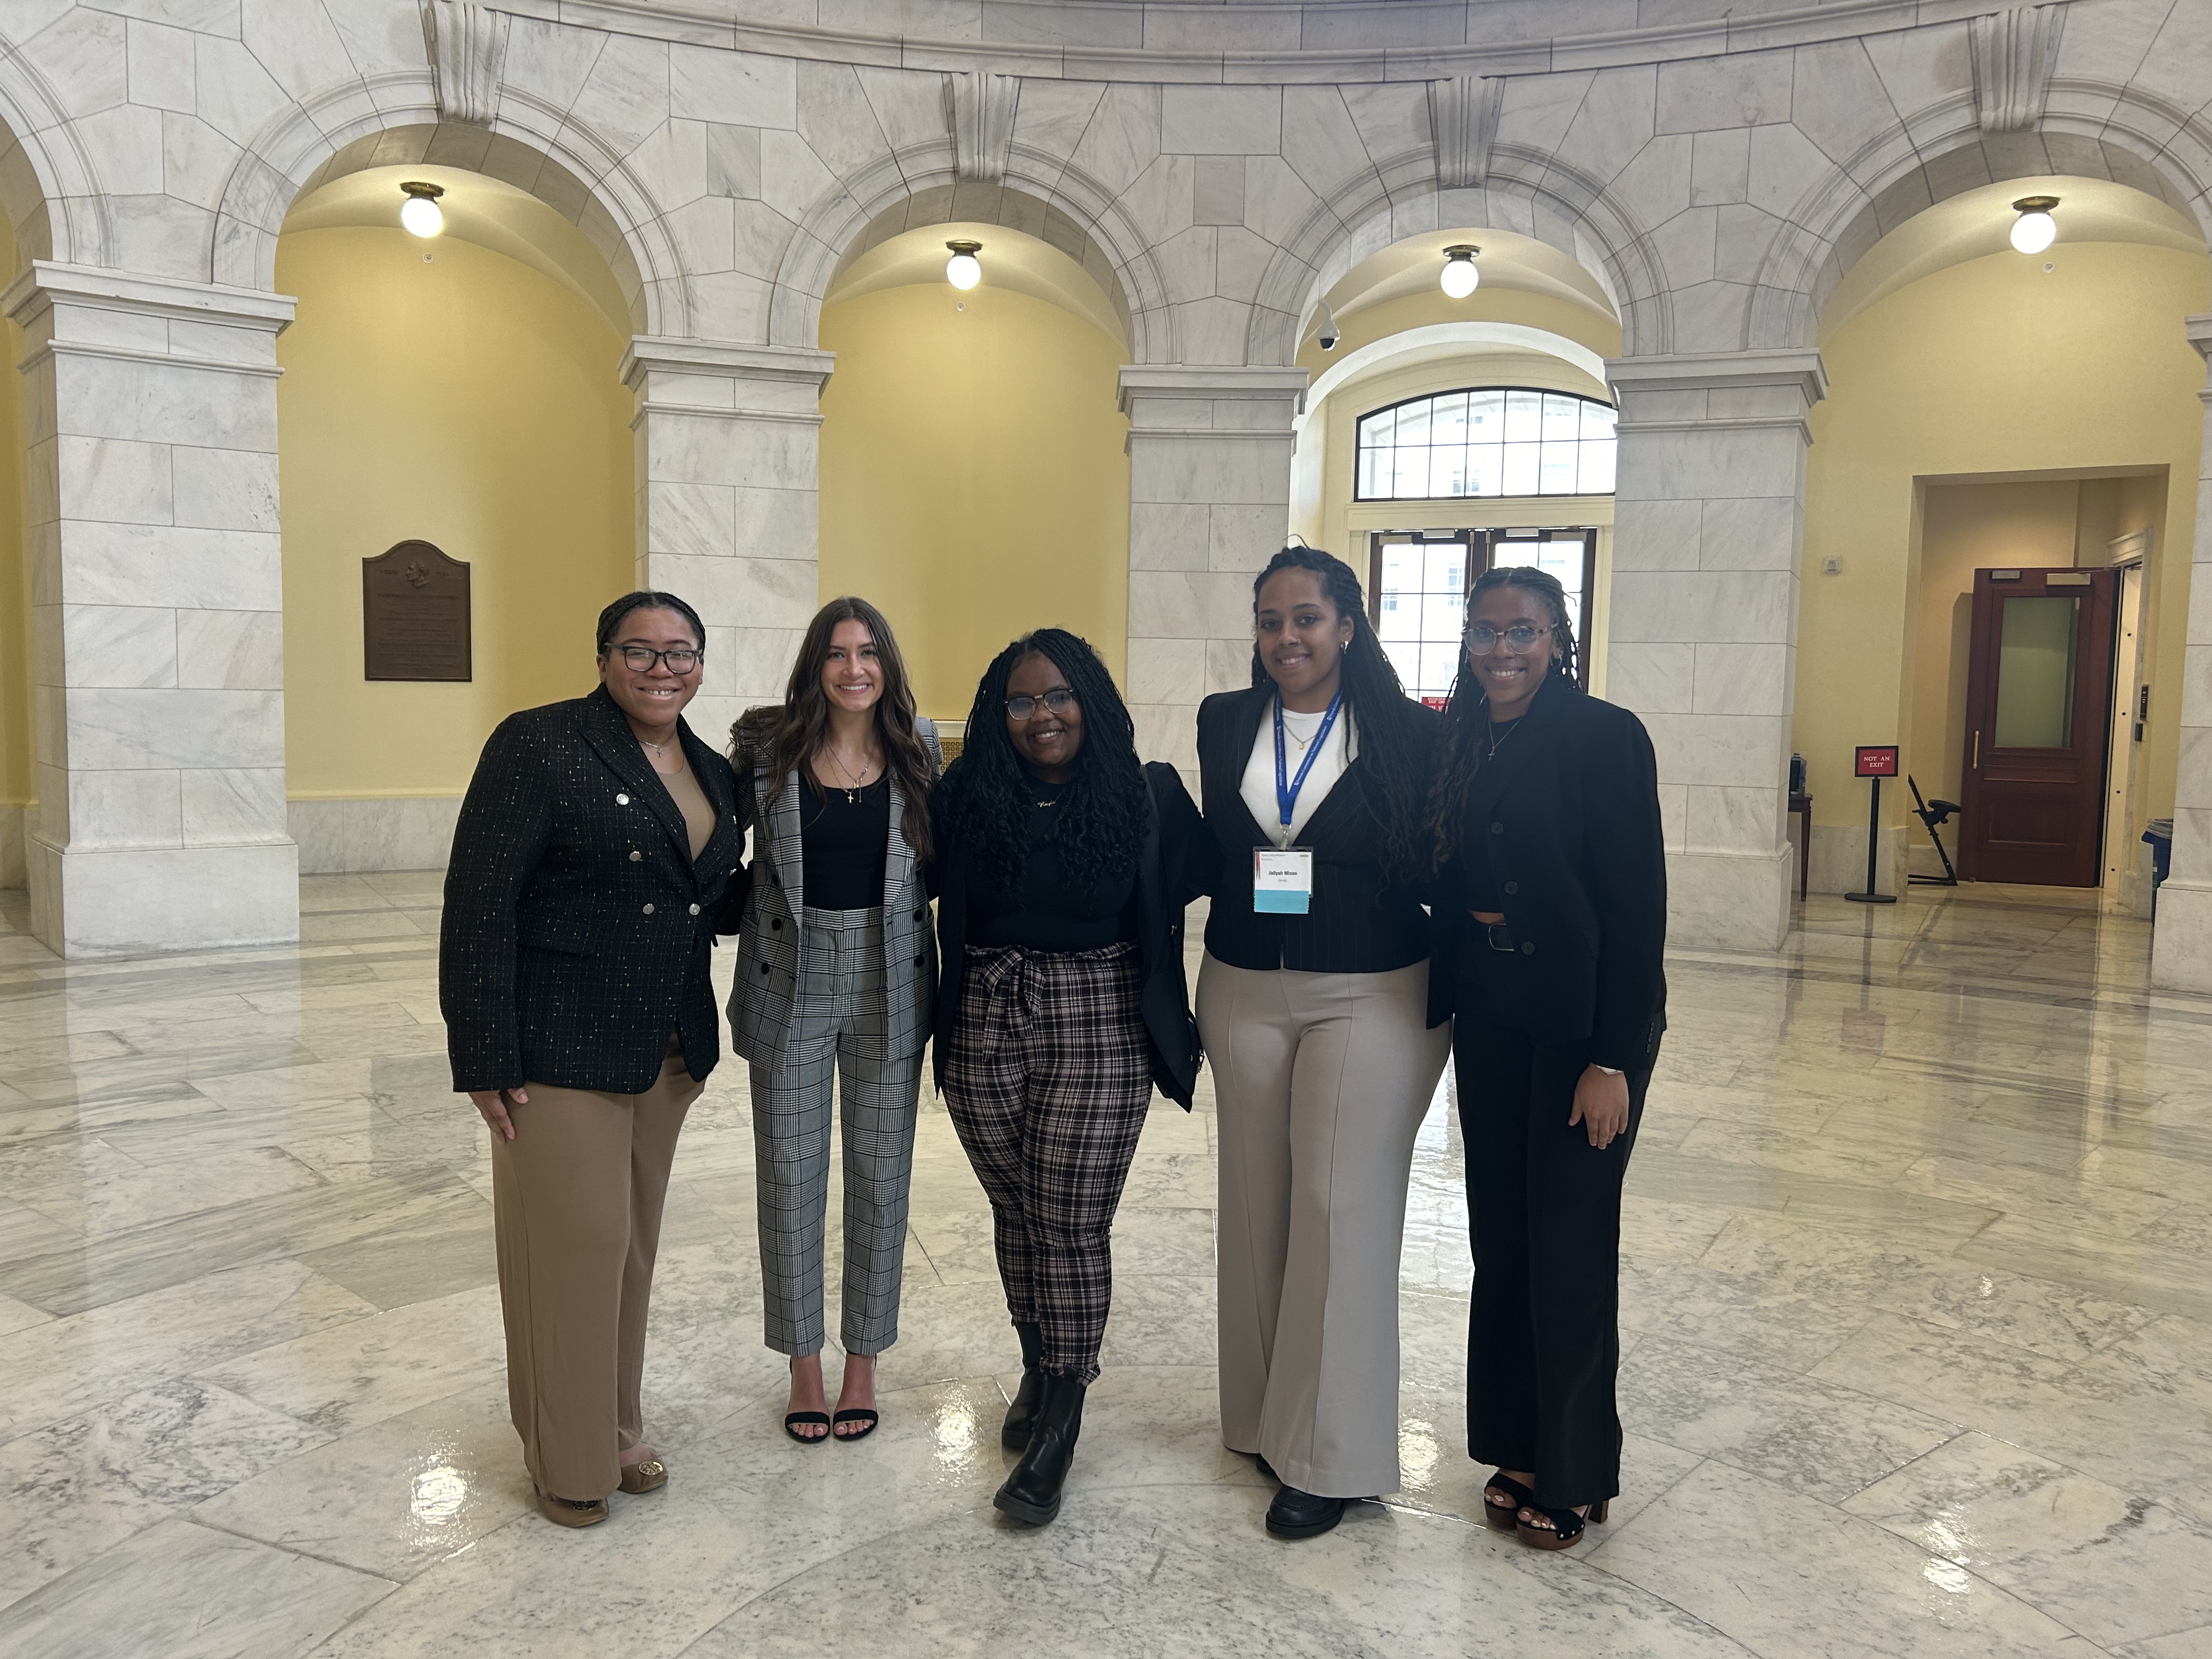 Students at the University of Mount Union Make an Impact in Washington DC